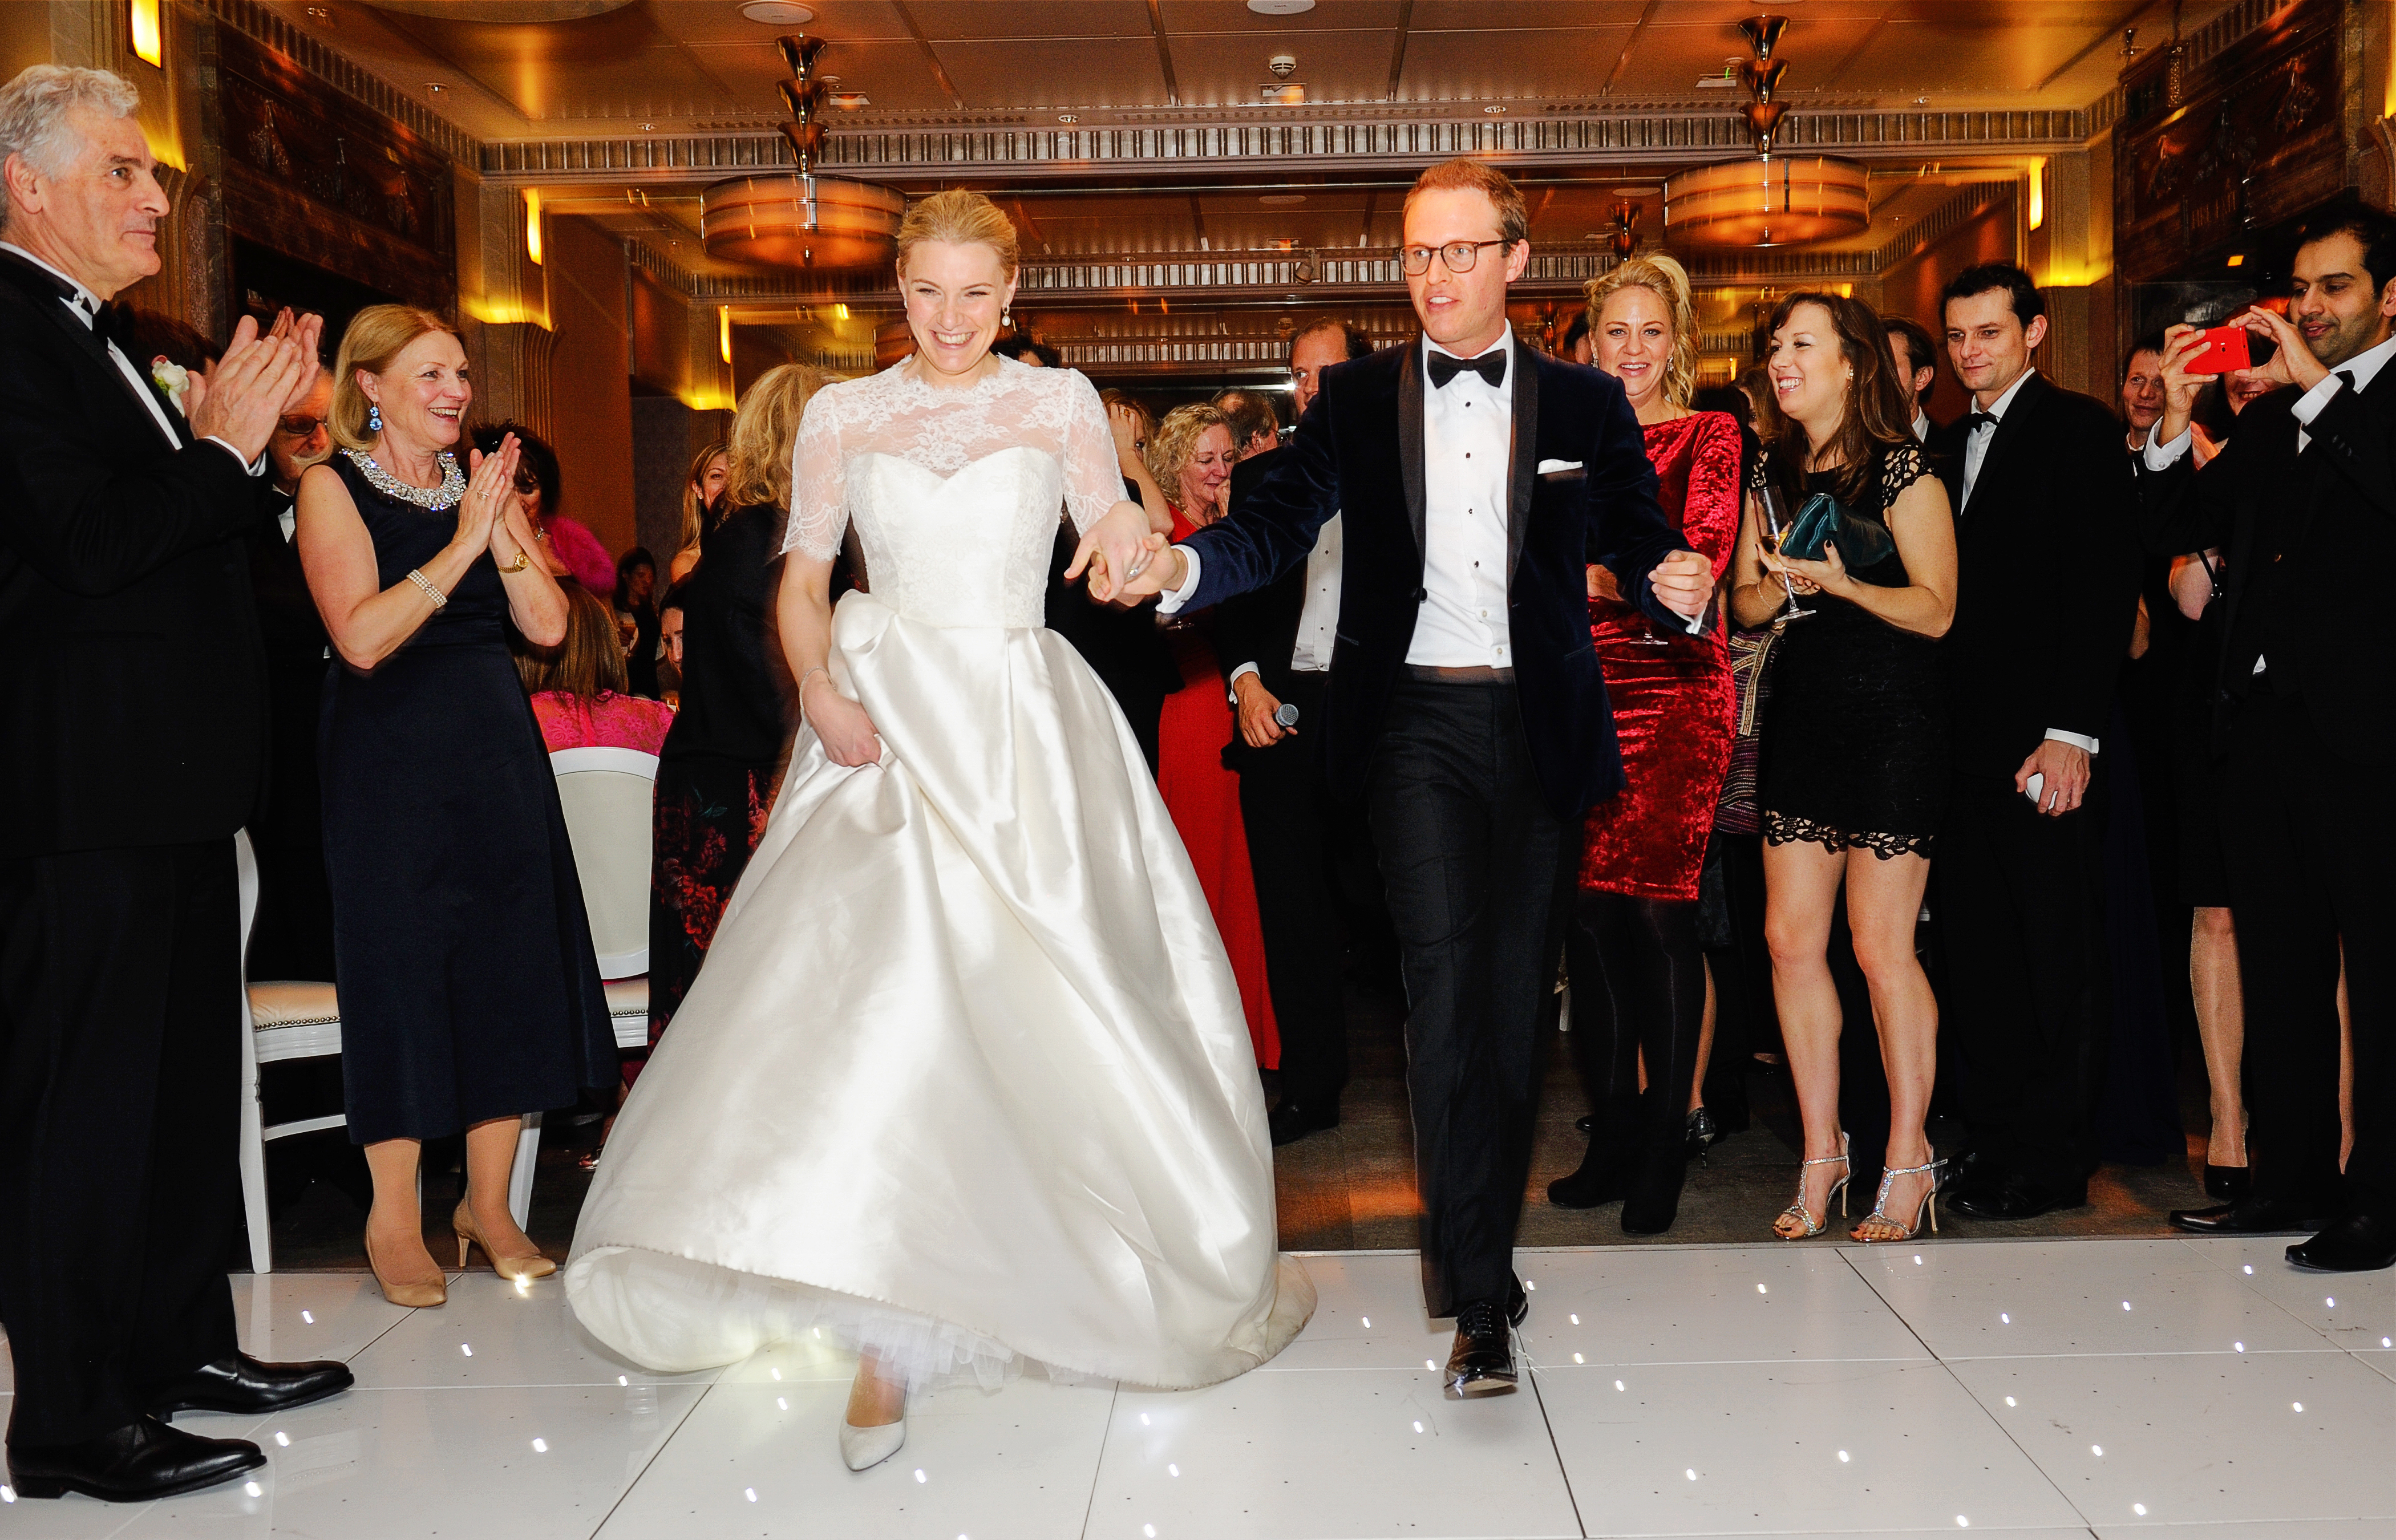 First dance at wedding party at the connaught with Mighty Fine Wedding DJs